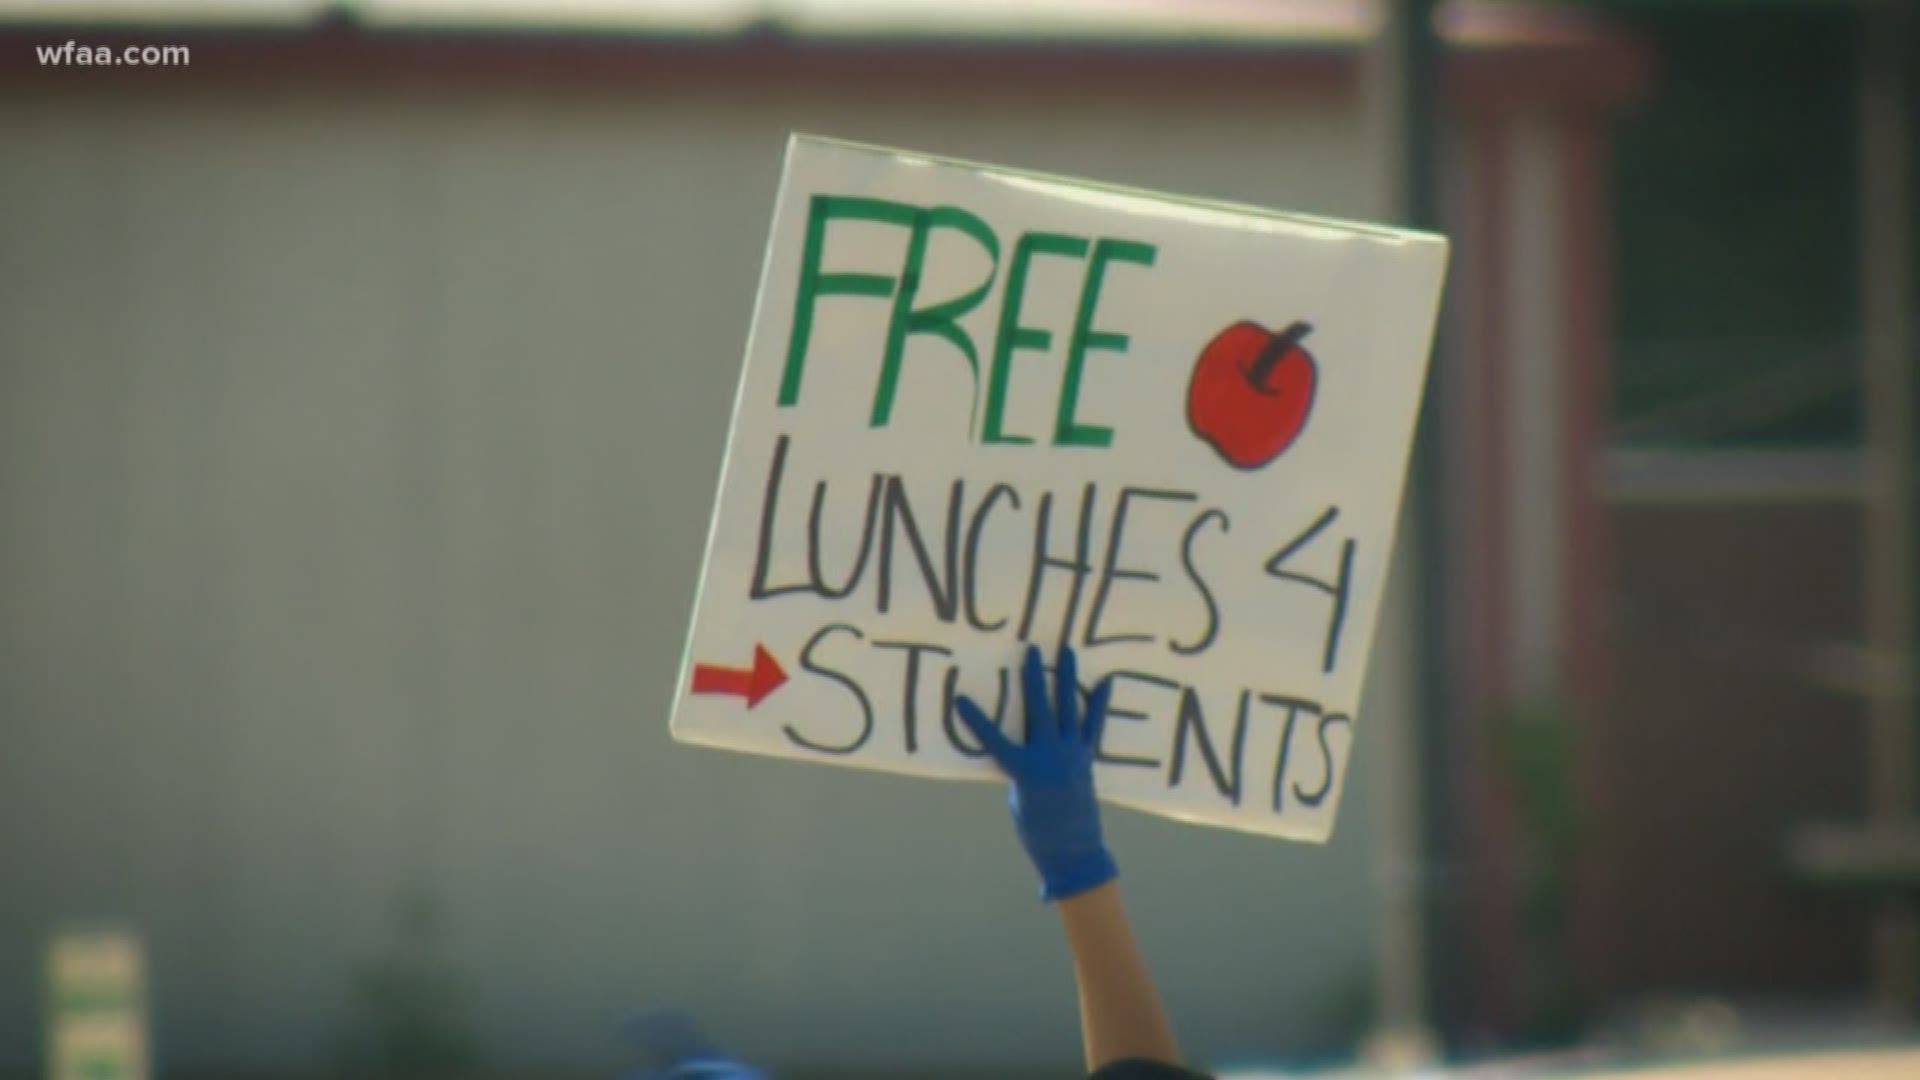 Students can now have convenient and daily access to a free and nutritious lunch at multiple locations.